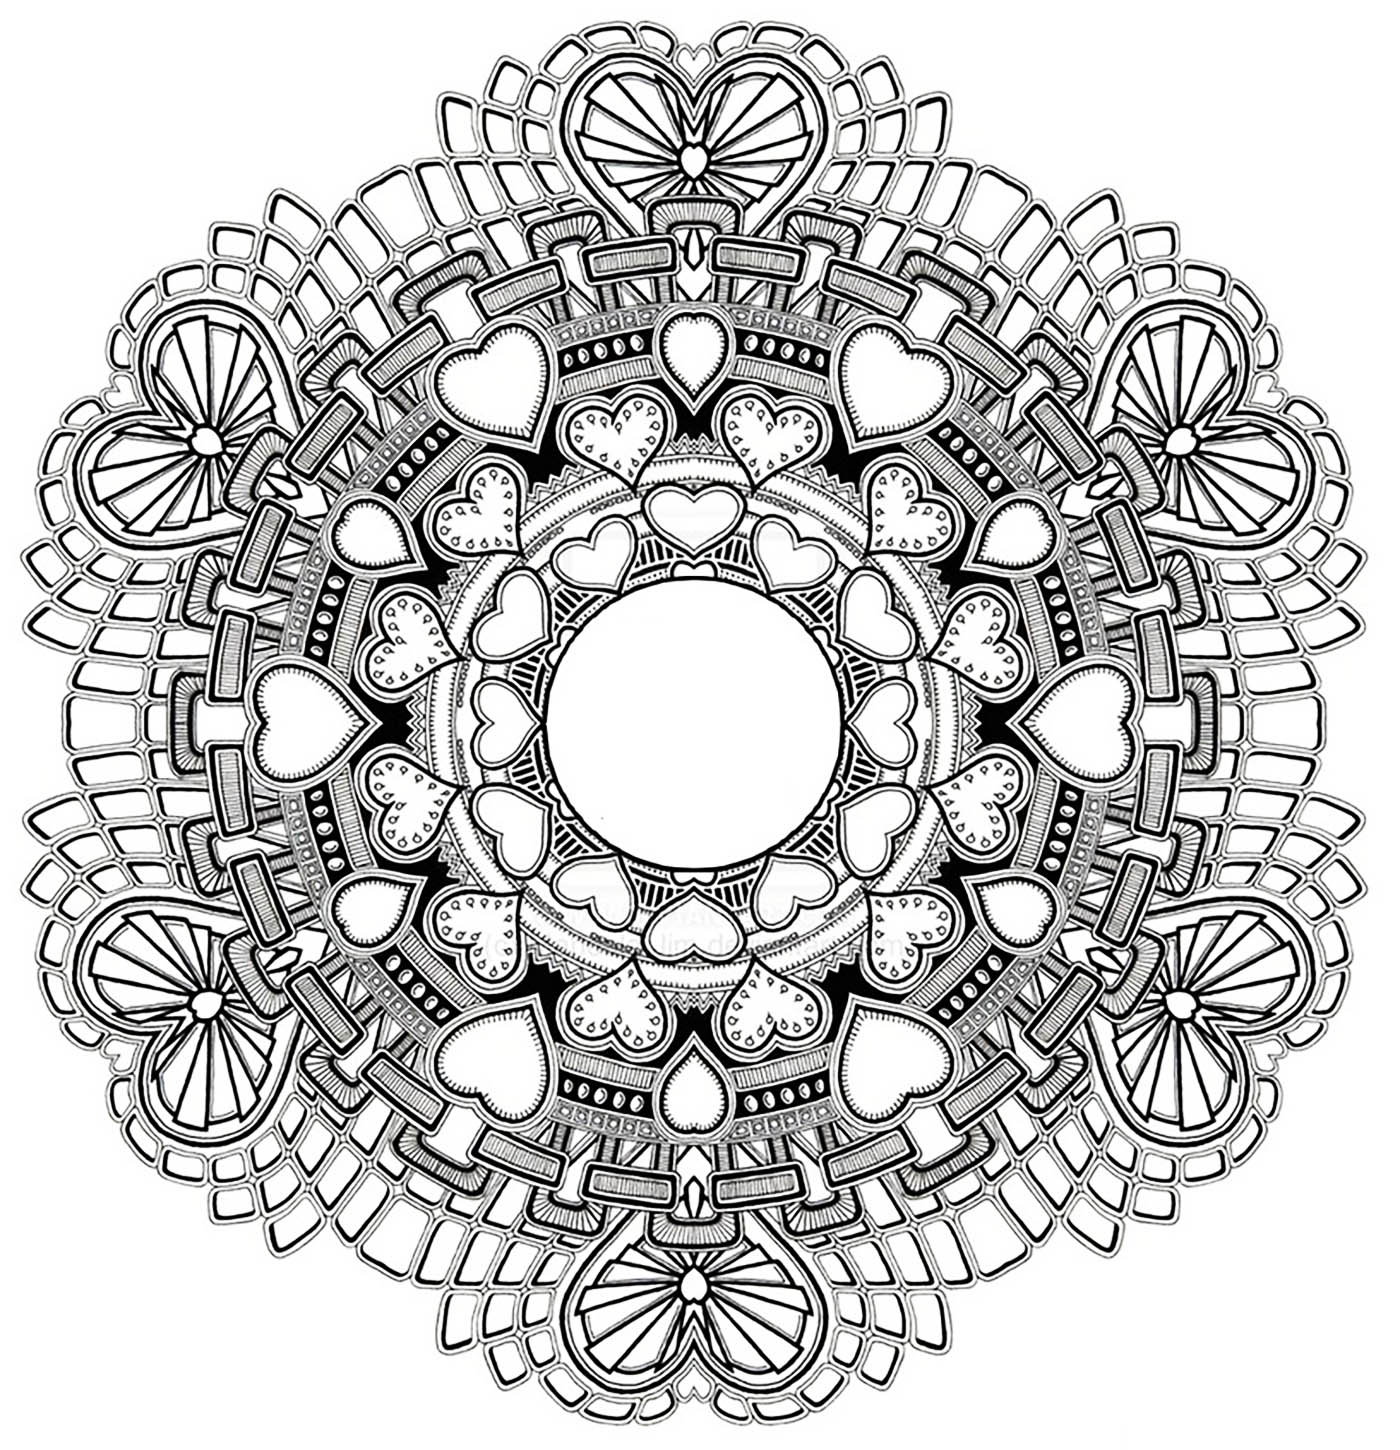 Mandala to download in pdf - 3 - Image with : Heart